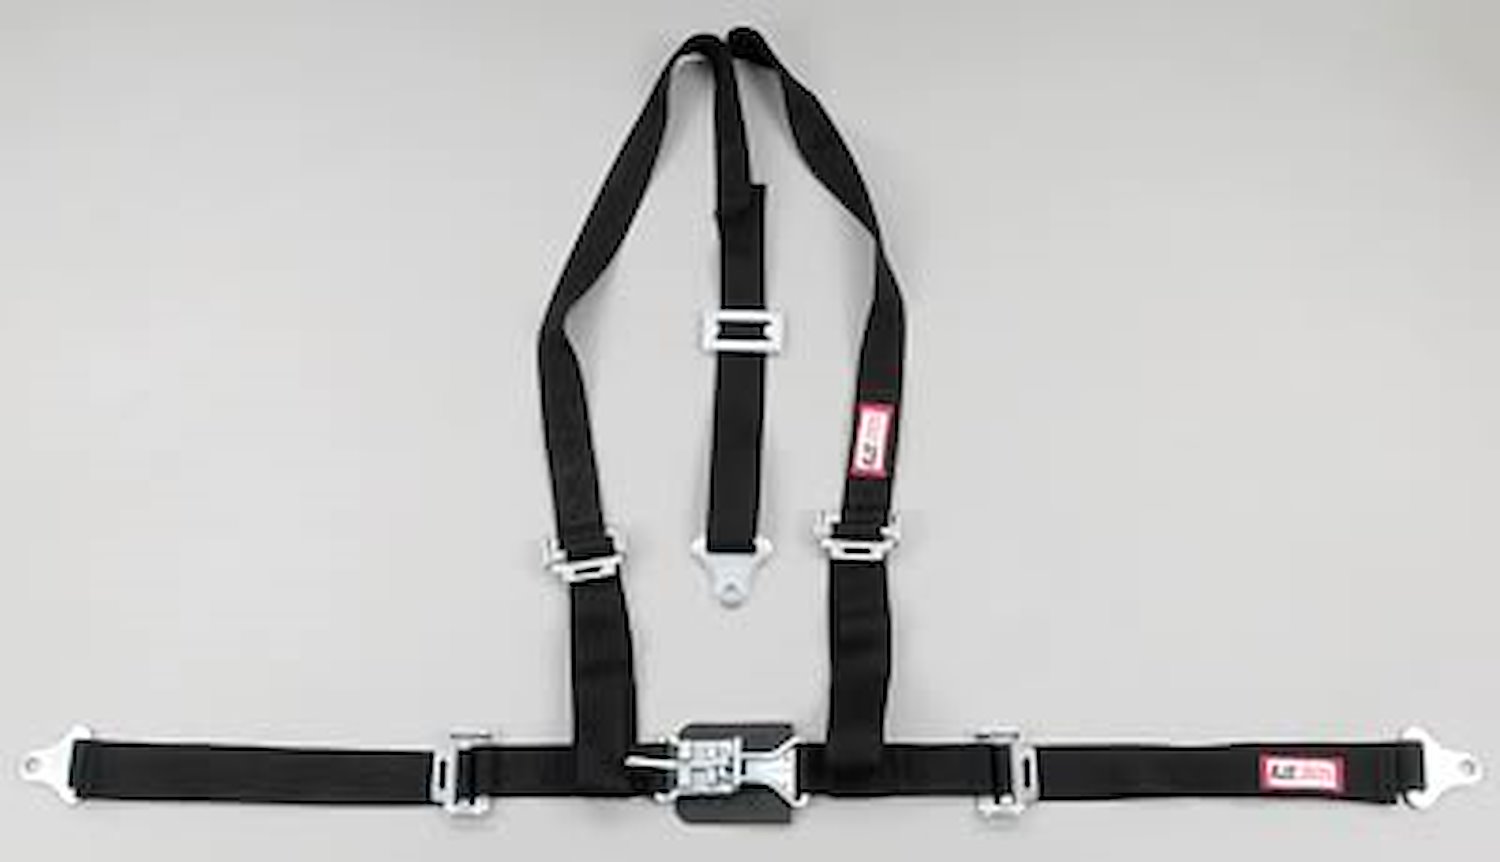 NON-SFI L&L HARNESS 3 PULL UP Lap Belt w/adjuster 2 S.H. Y FLOOR Mount ALL WRAP ENDS BLACK